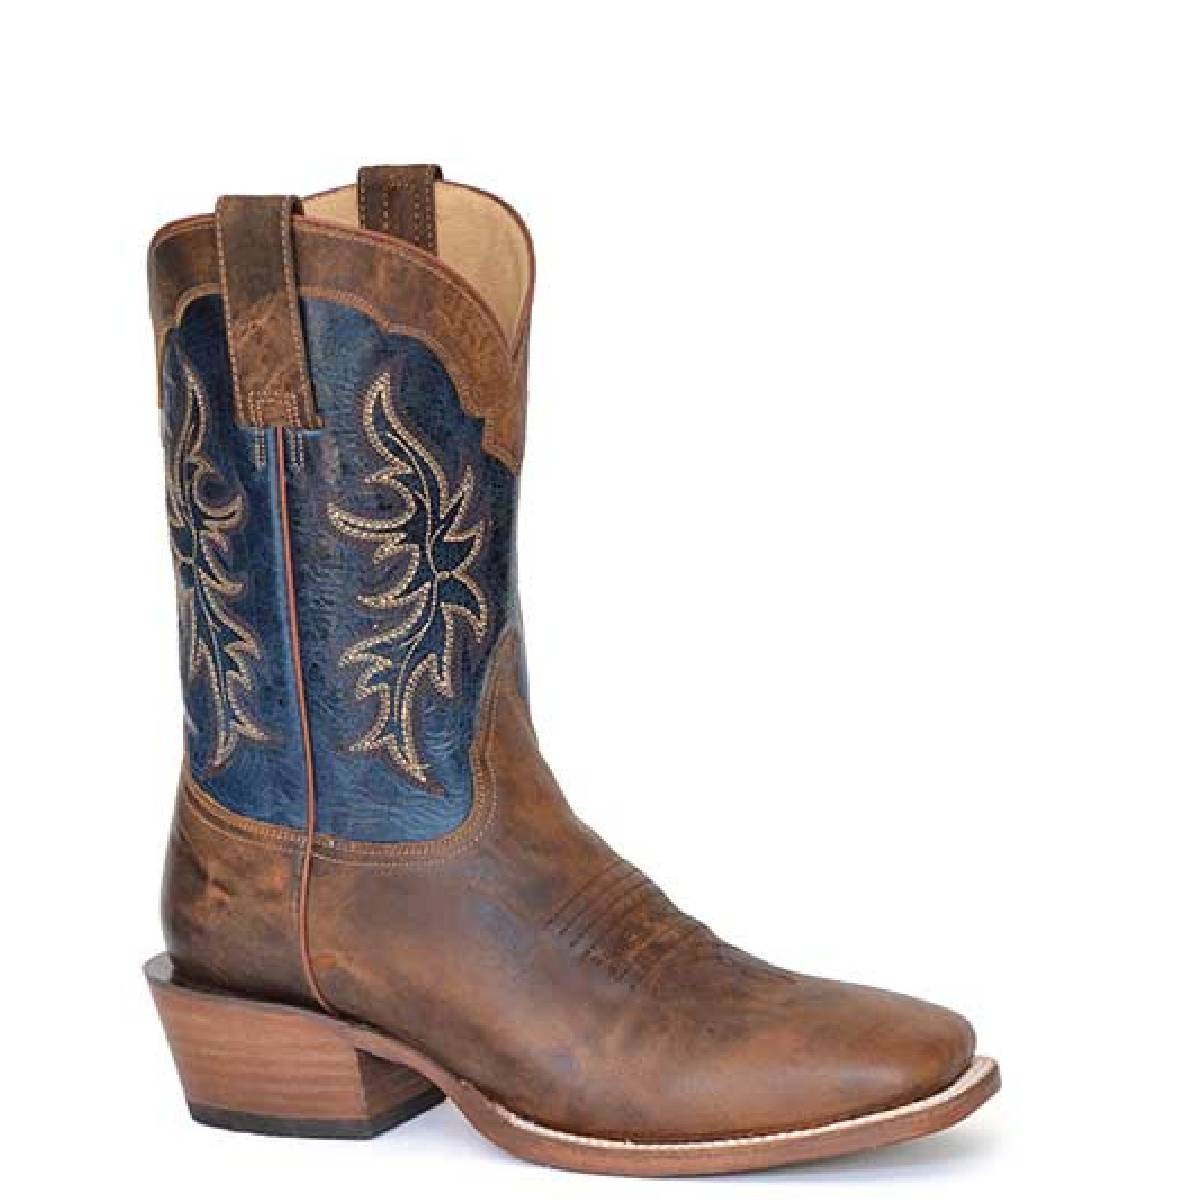 Men's Roper Ride 'Em Cowboy Leather Boots Handcrafted Tan - yeehawcowboy